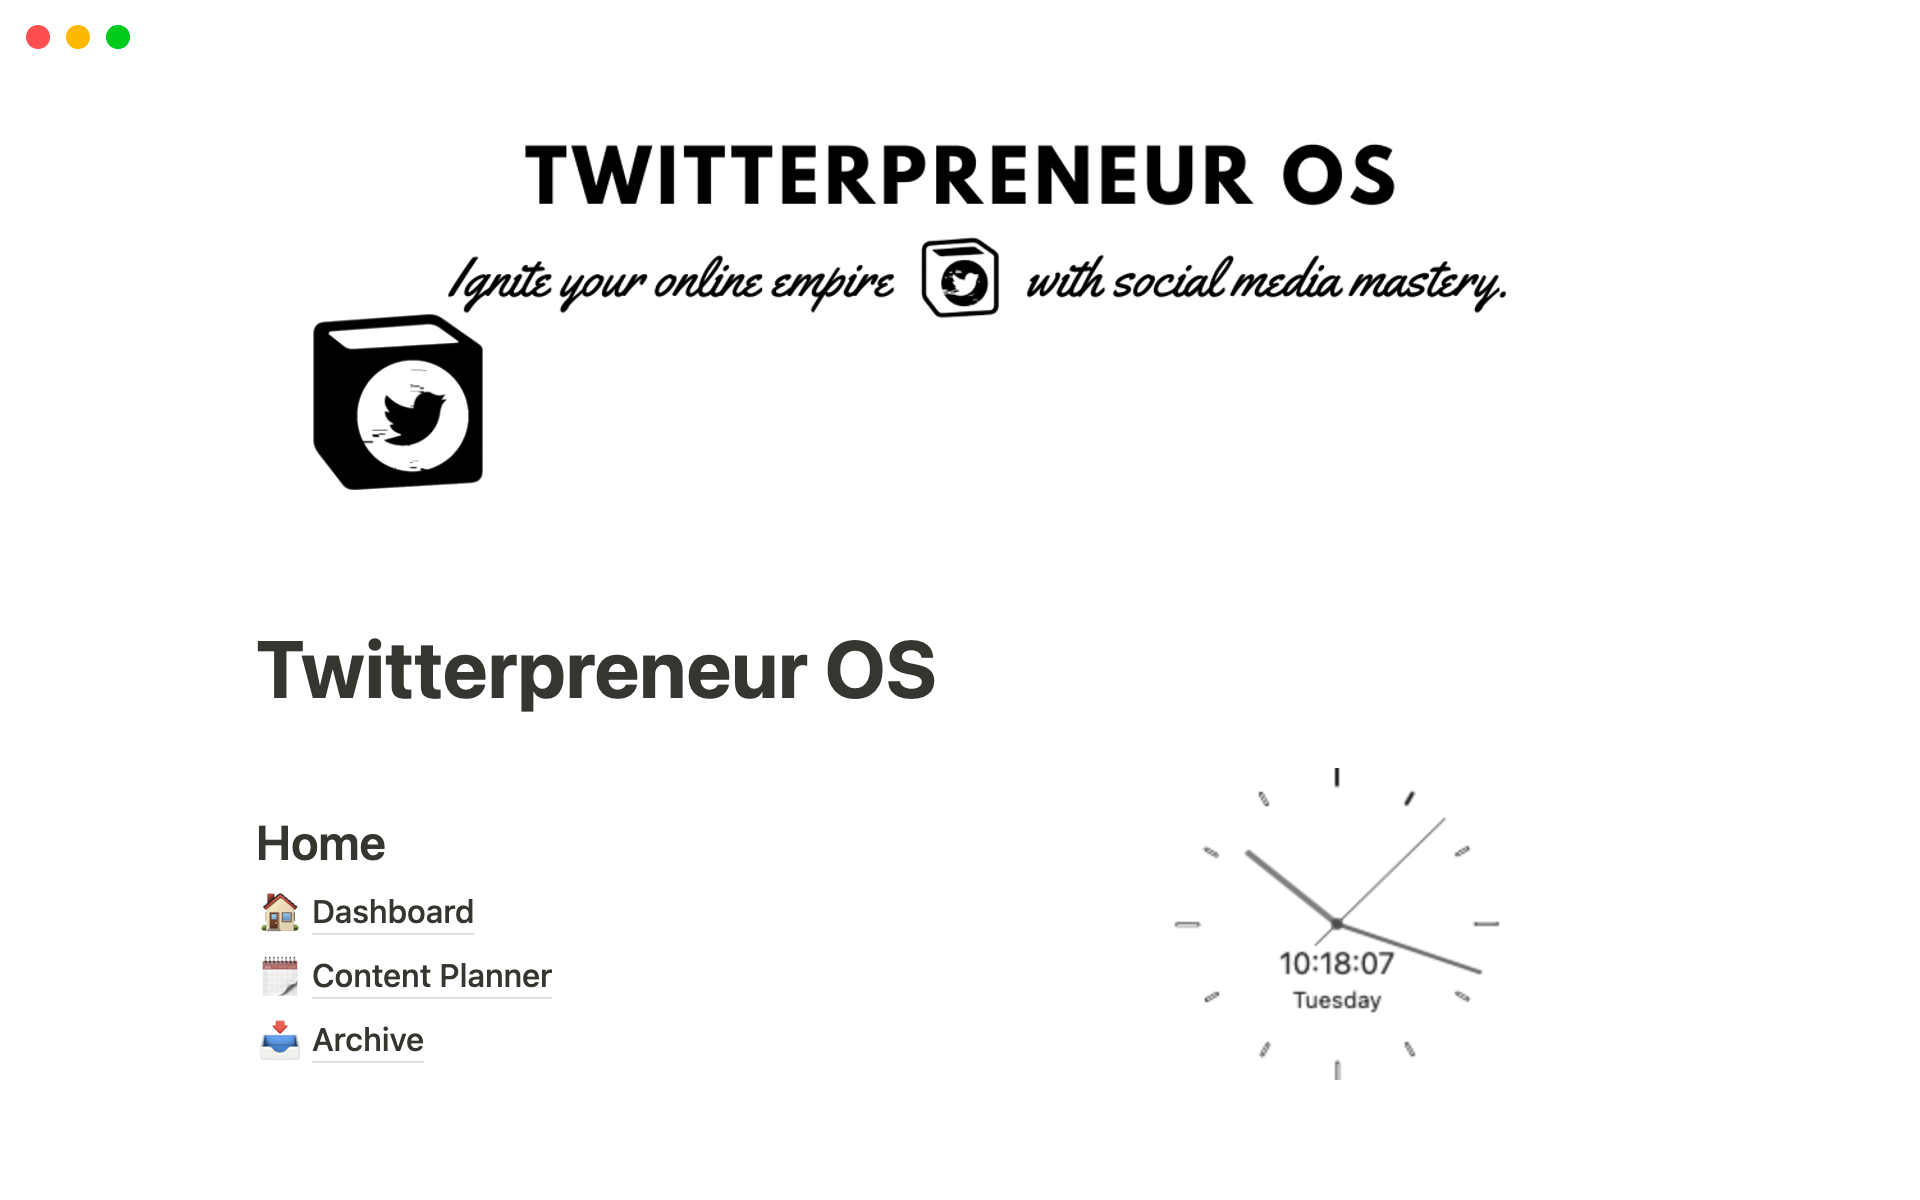 This template gives you everything you'll need to start your soloentrepeneur journey on Twitter.